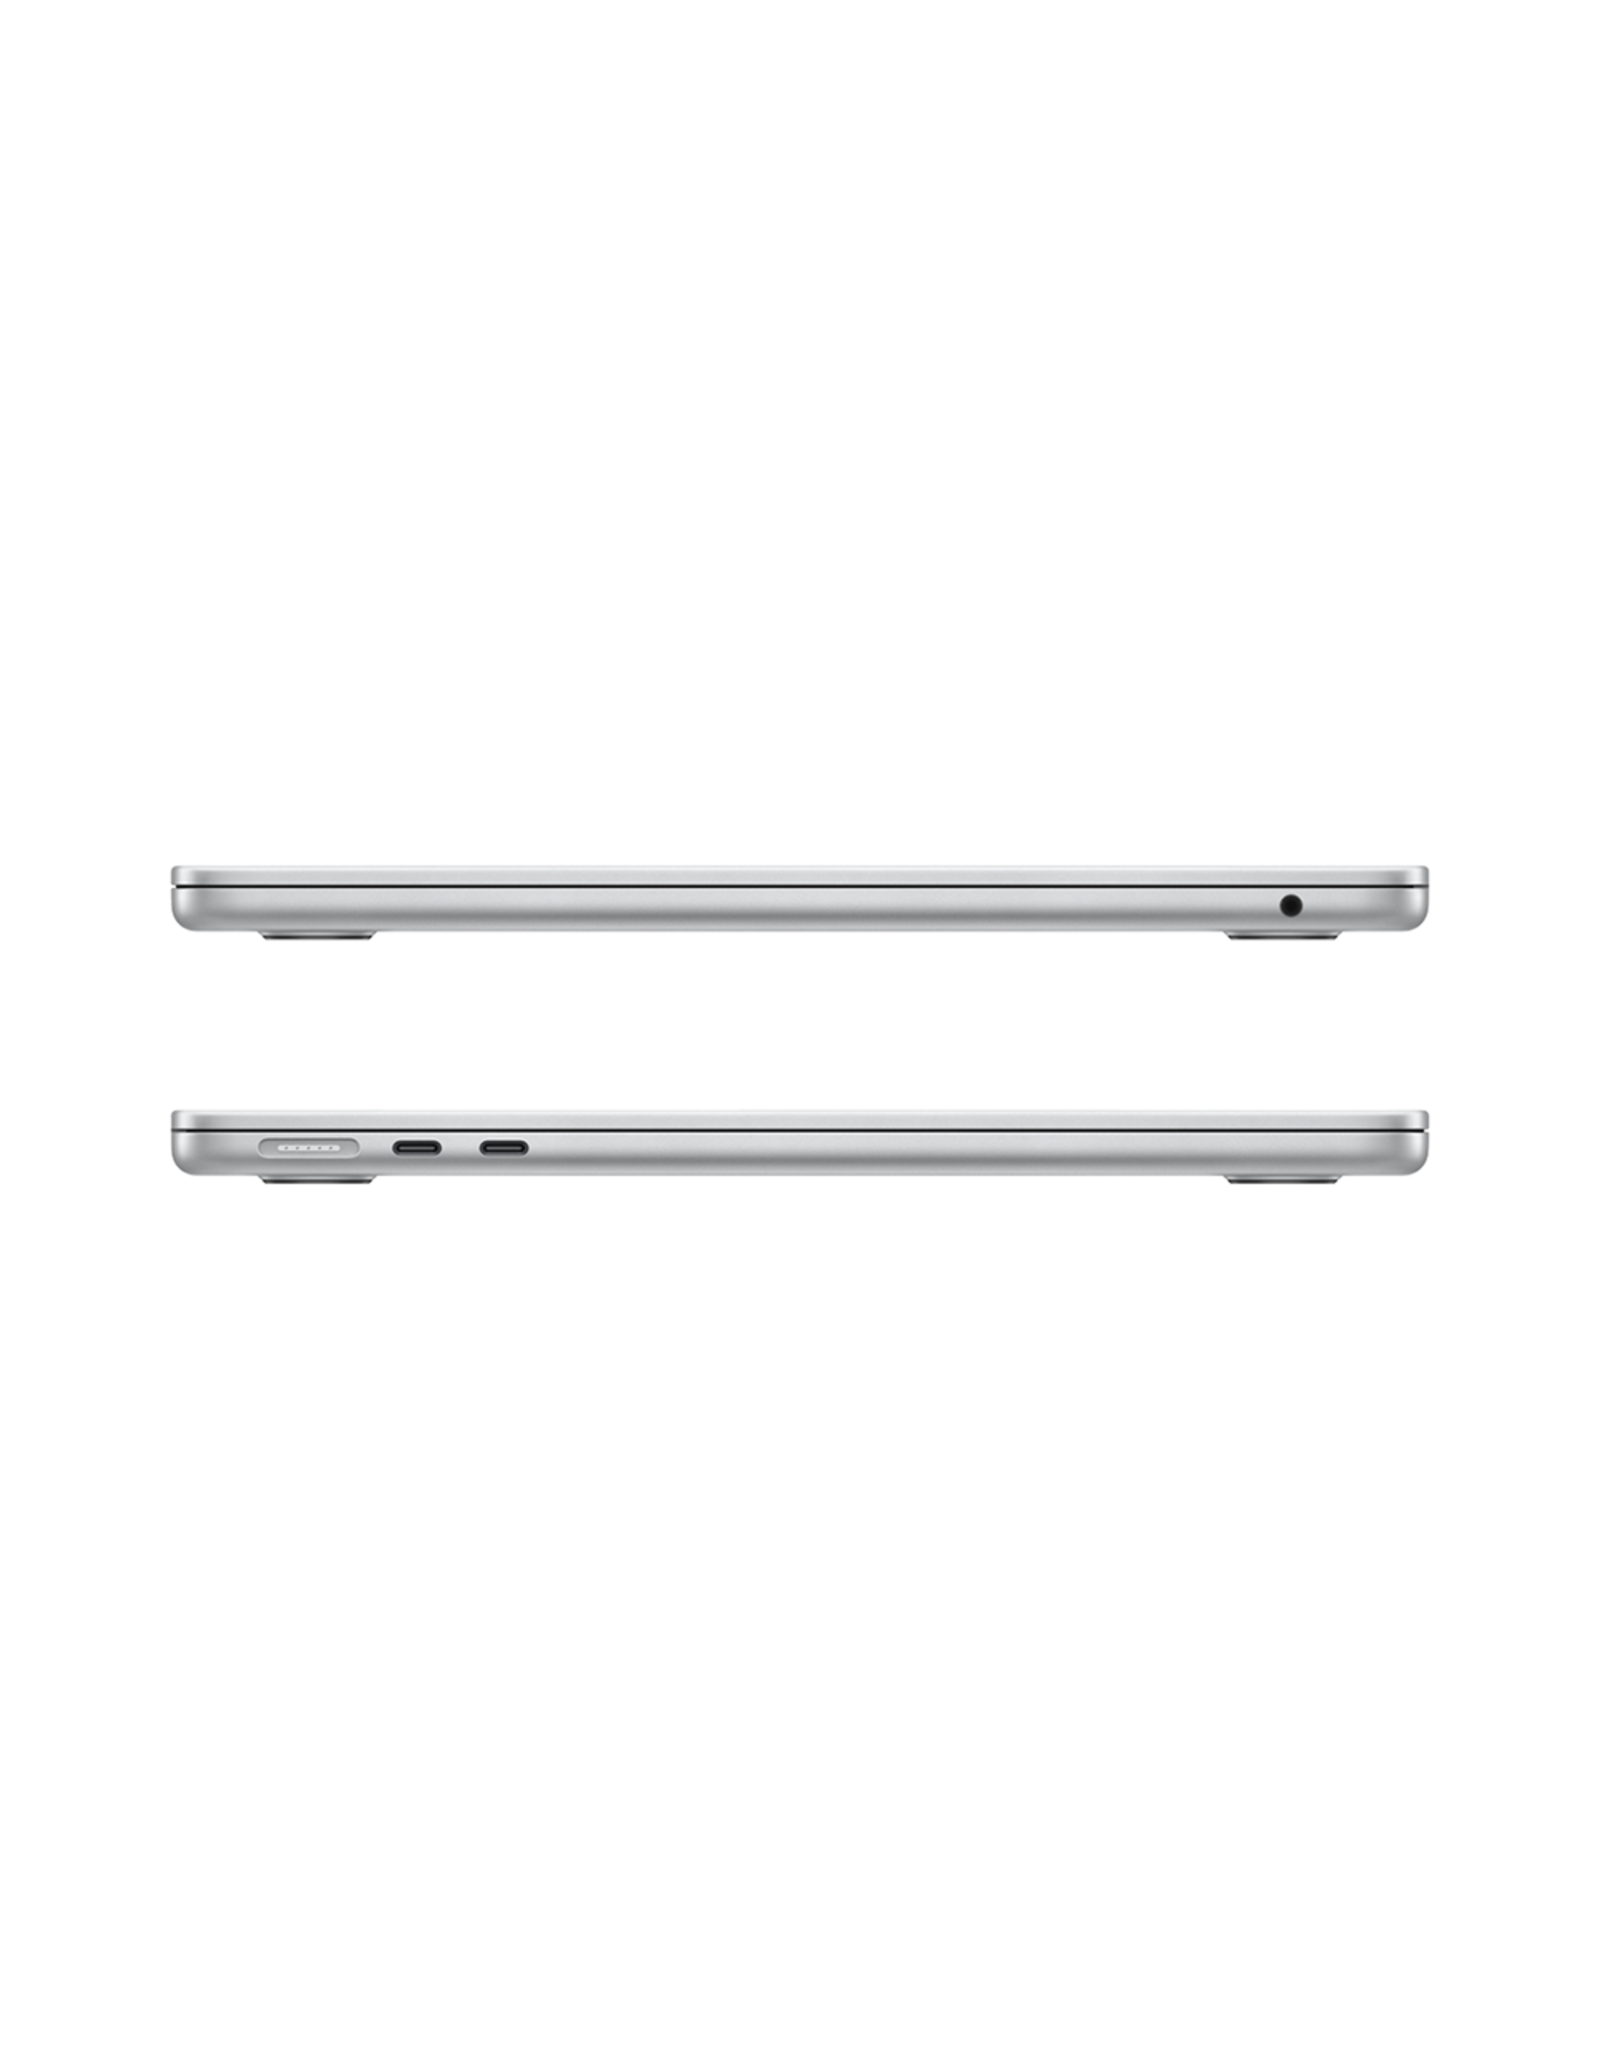 Apple 13-inch MacBook Air: Apple M2 chip with 8-core CPU and 8-core GPU, 256GB - Silver